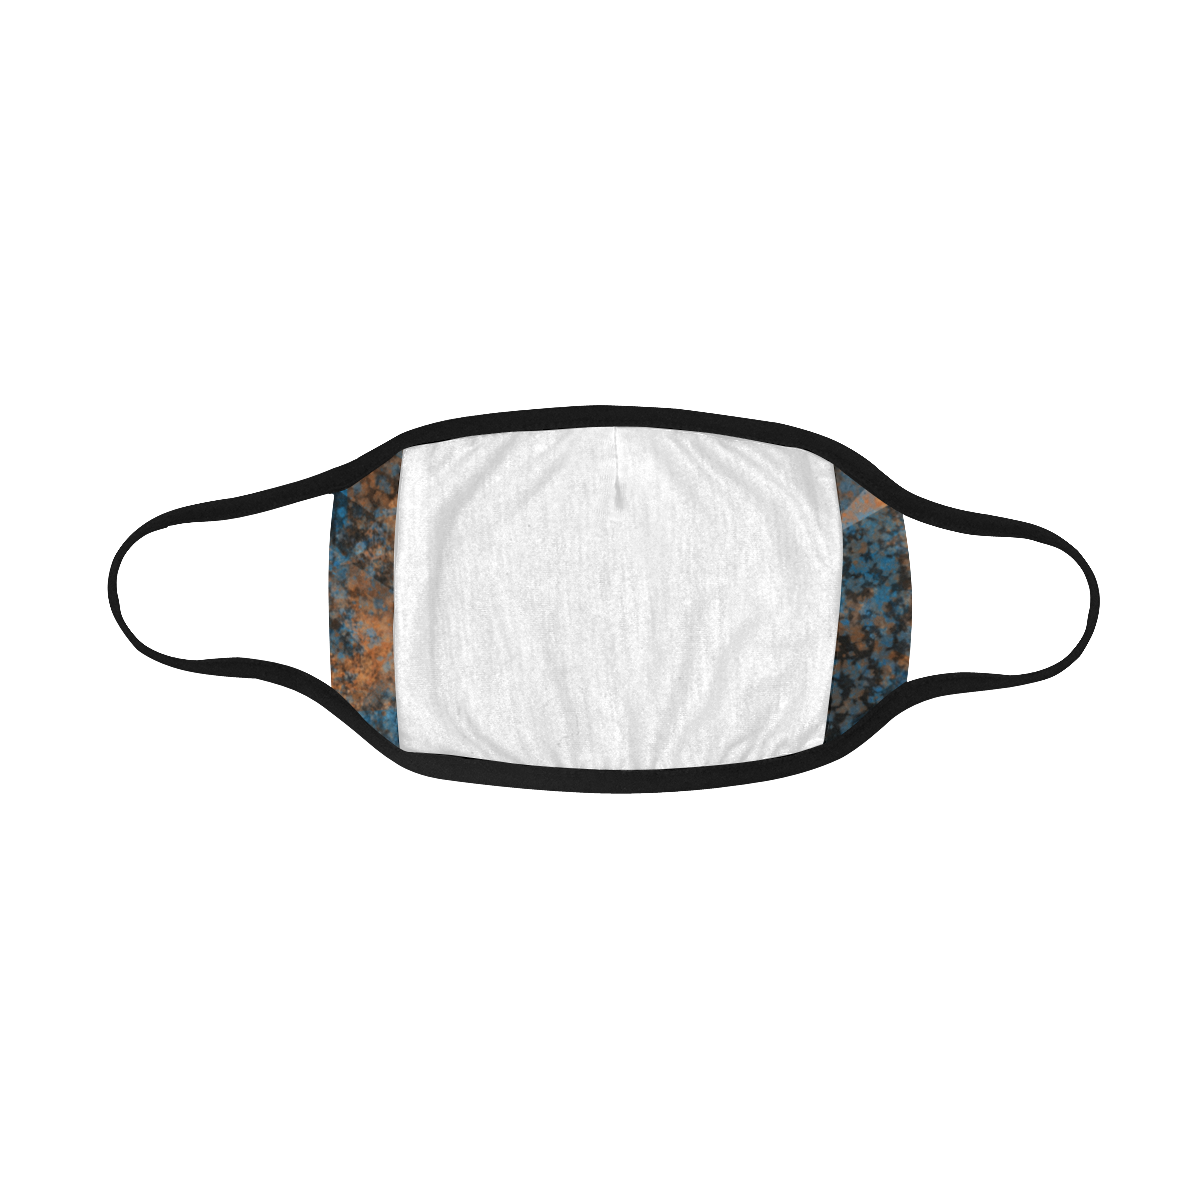 RusticTomorrow Mouth Mask